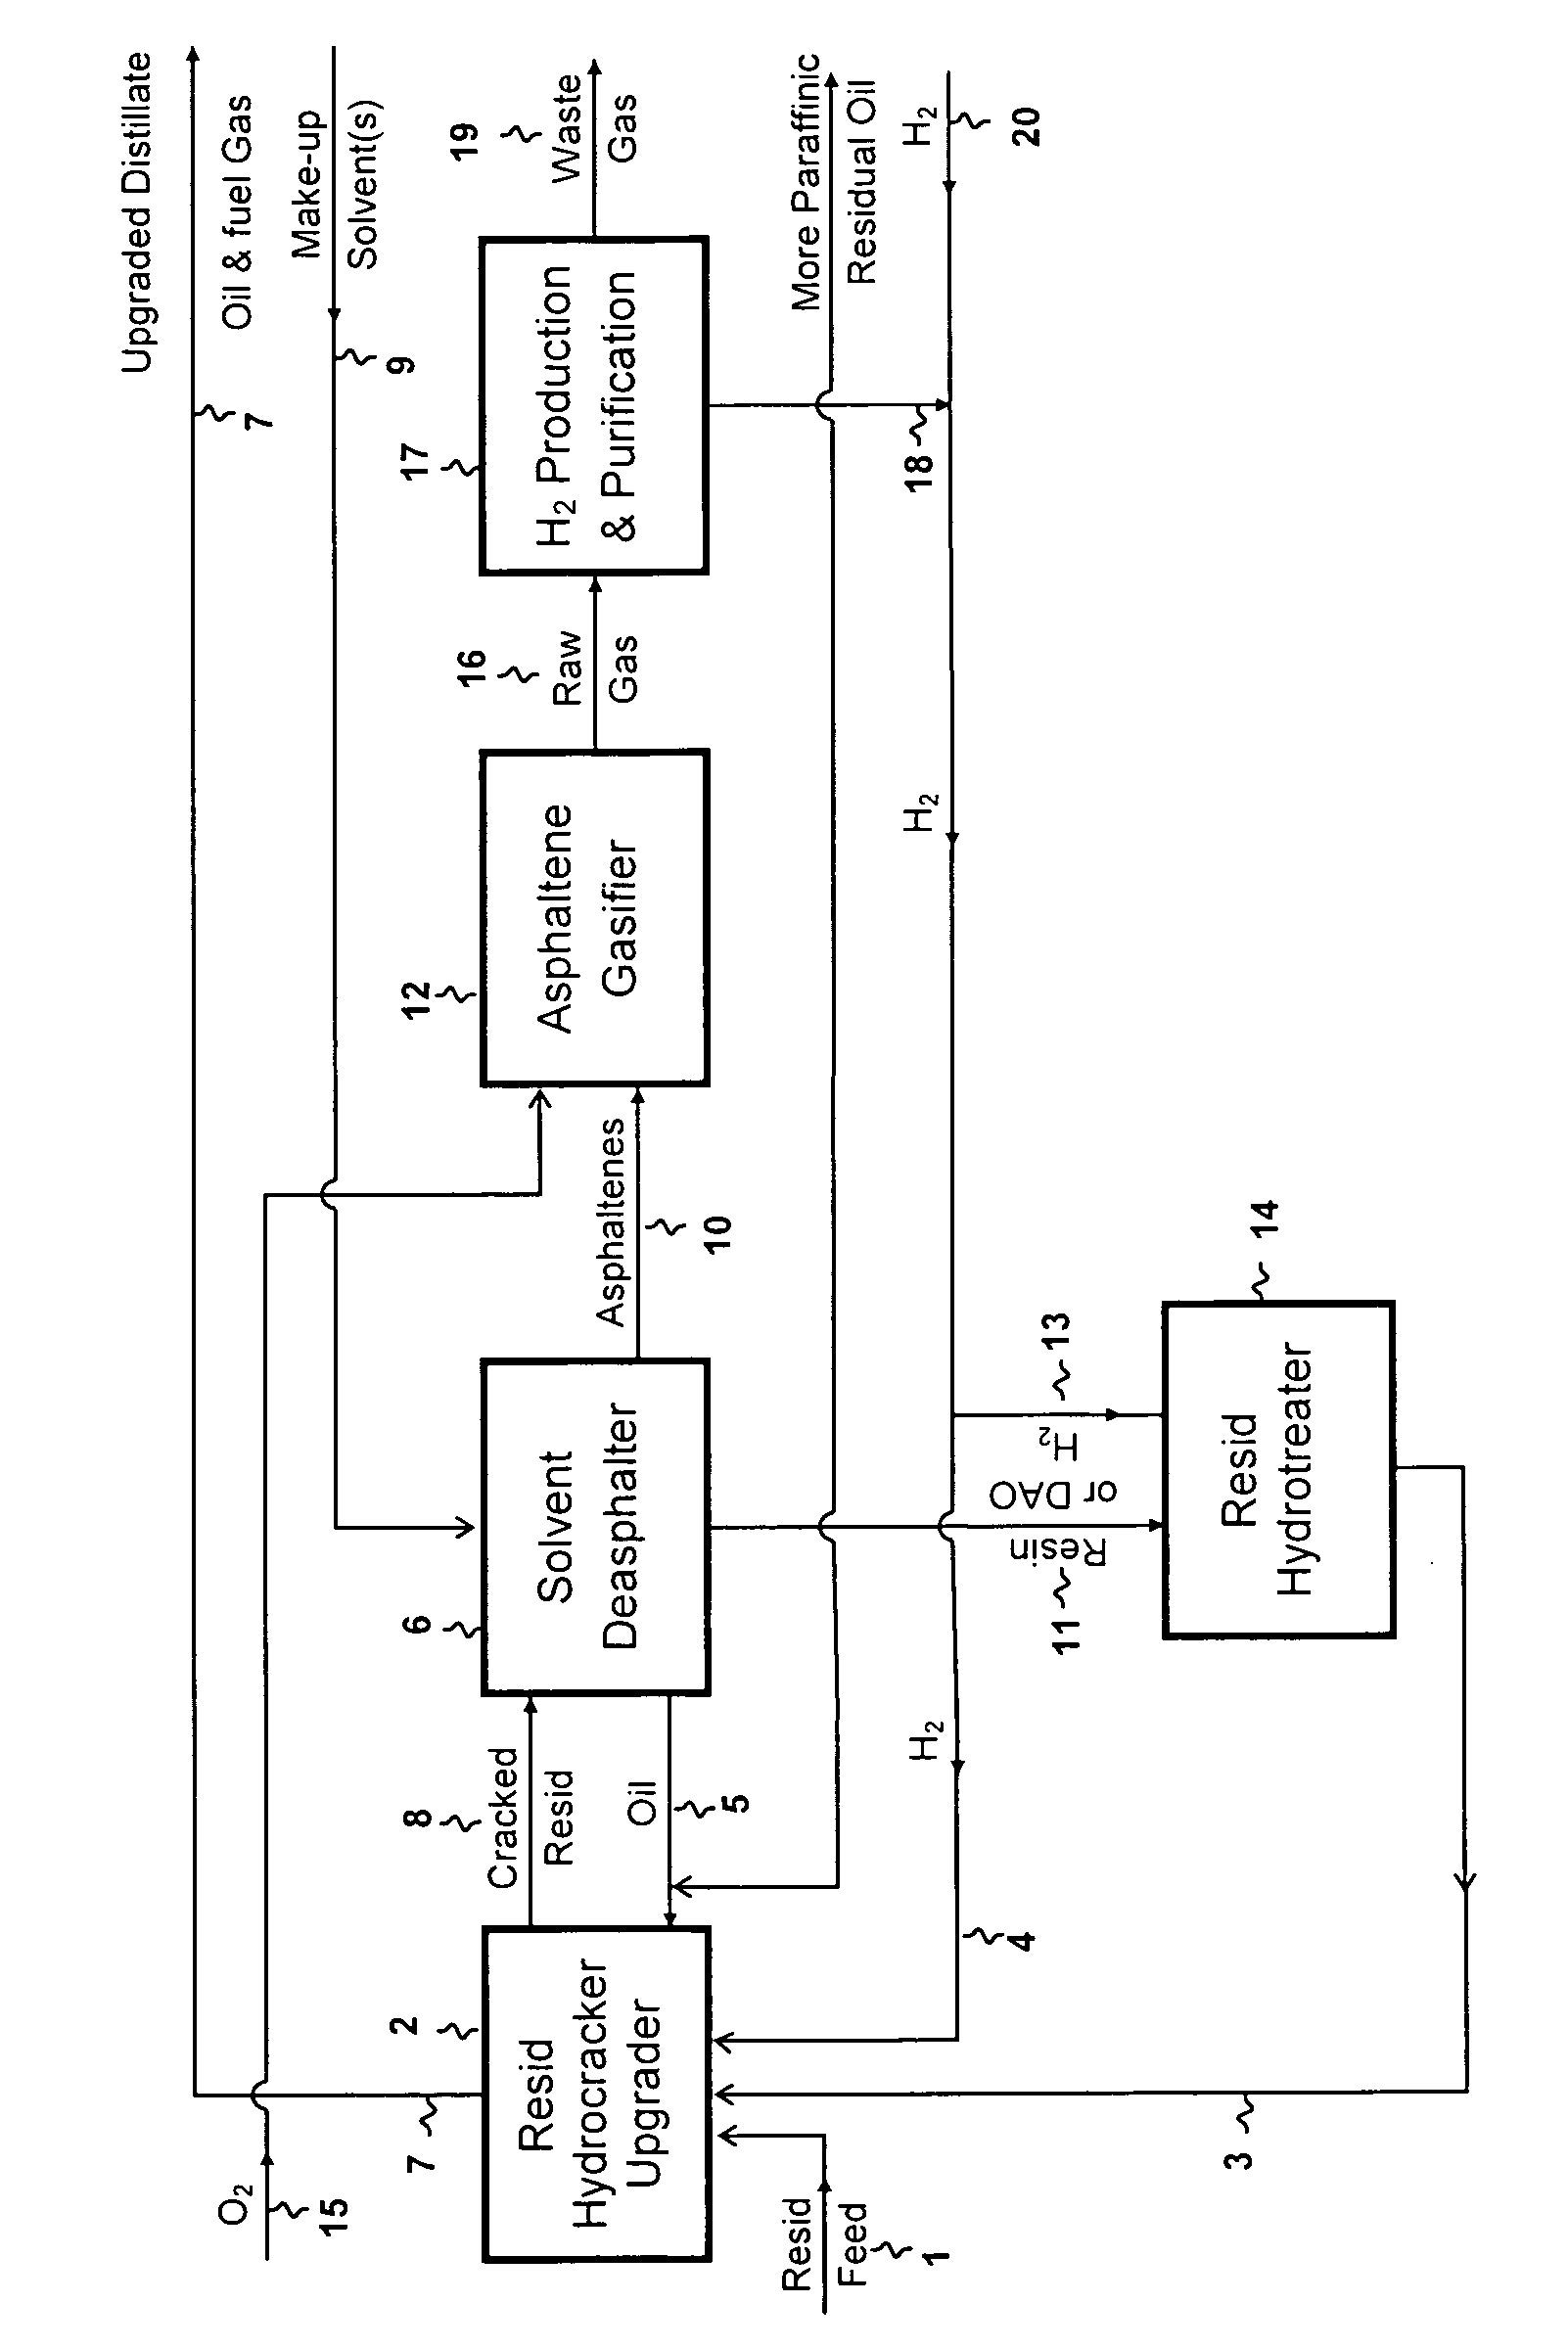 Hydrogen donor solvent production and use in resid hydrocracking processes